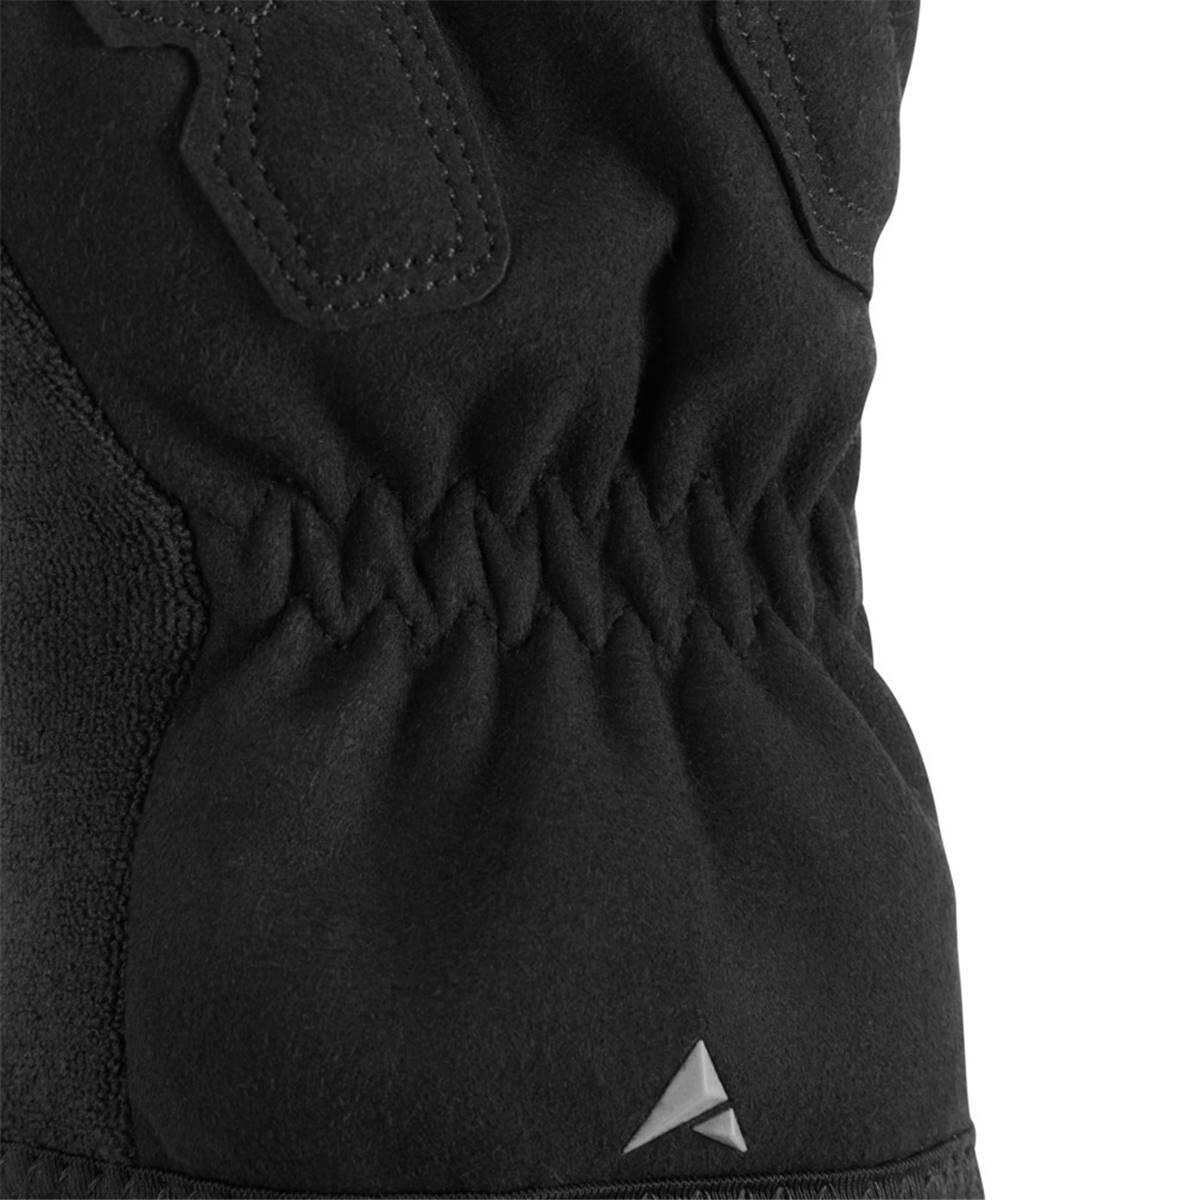 Nightvision Unisex Windproof Fleece Cycling Gloves 6/7